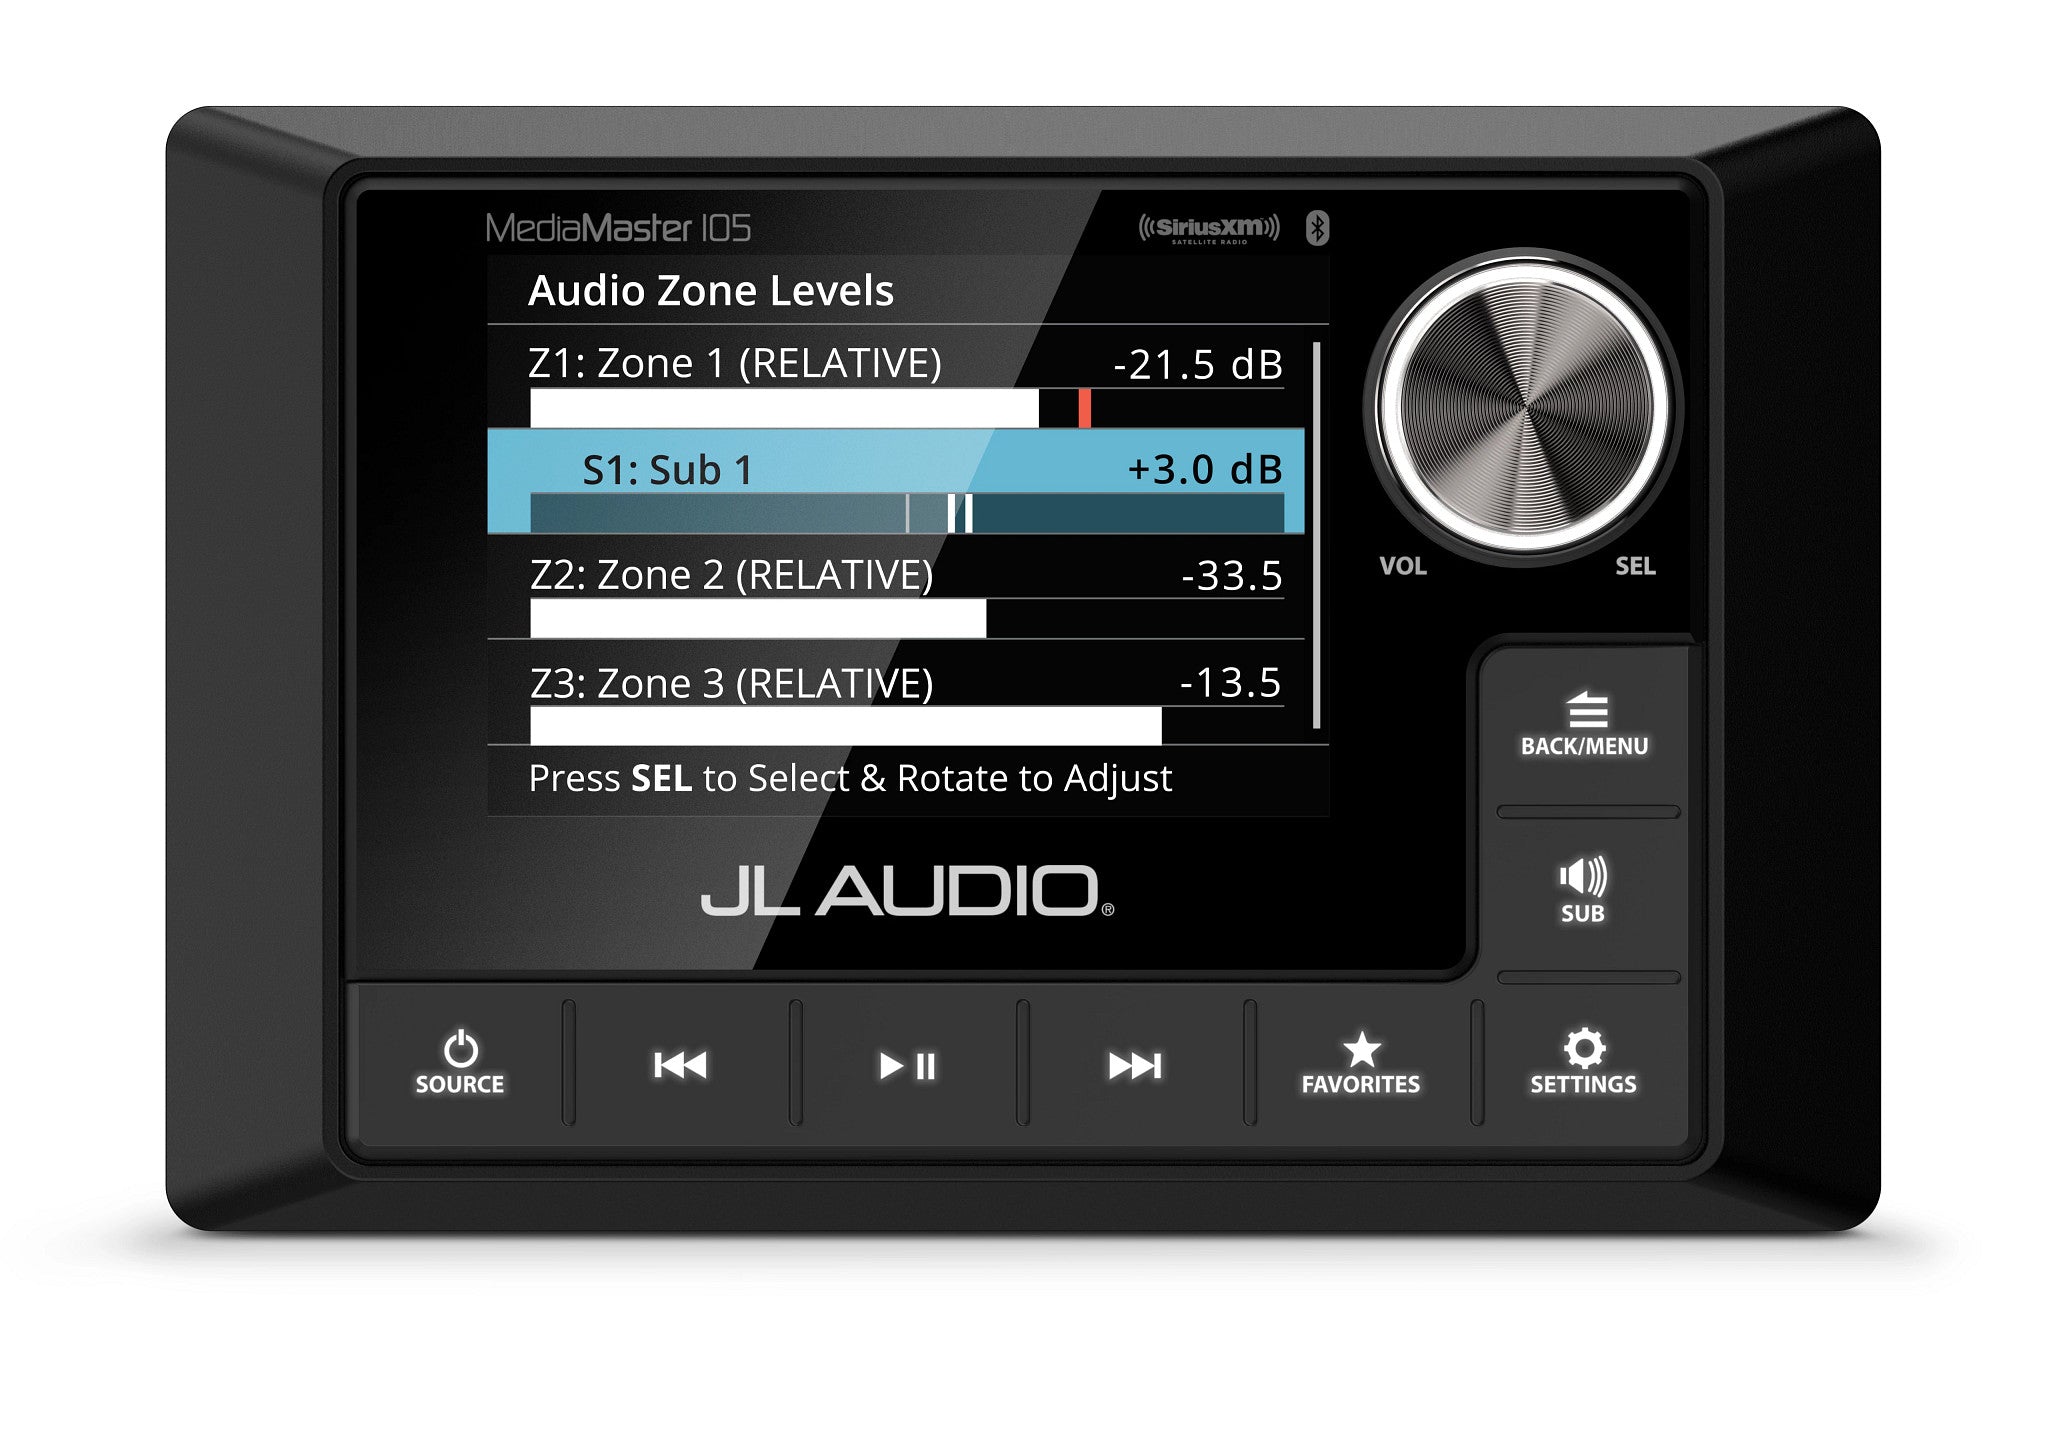 MediaMaster MM105 Front Overhead with Audio Zone Levels screen adjusting Sub 1 level